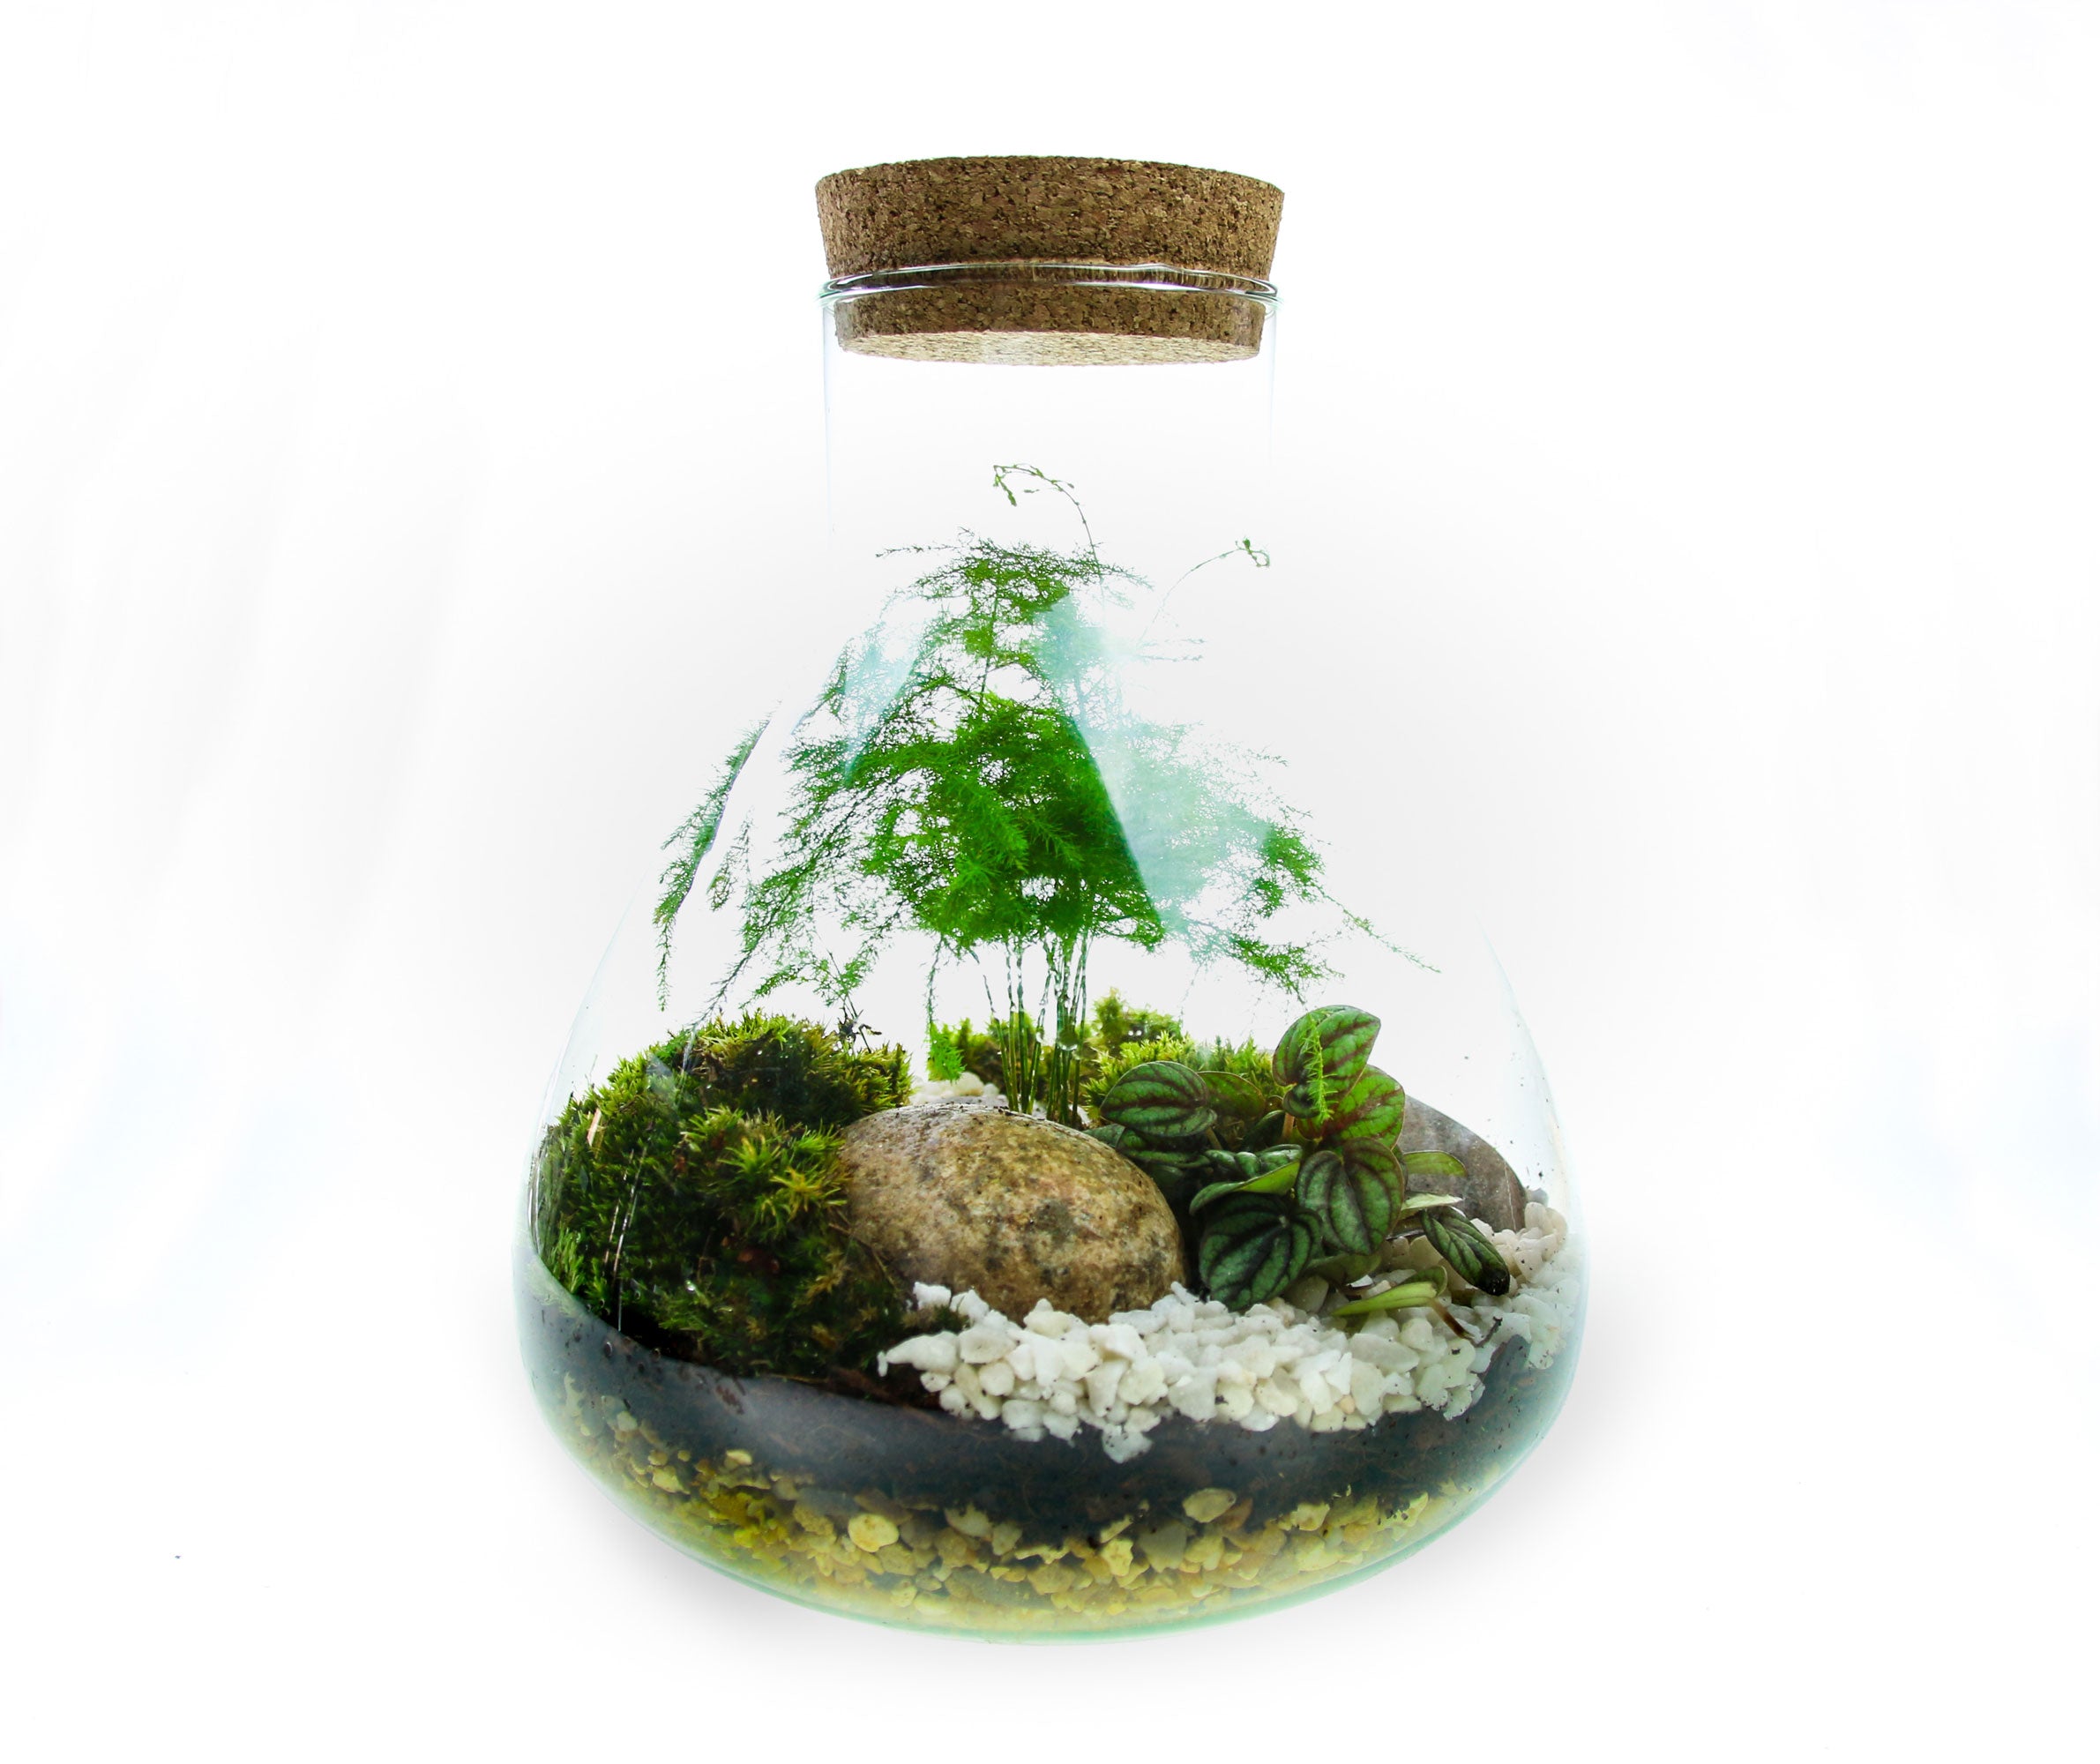 House warming gift with plants - terrarium kit